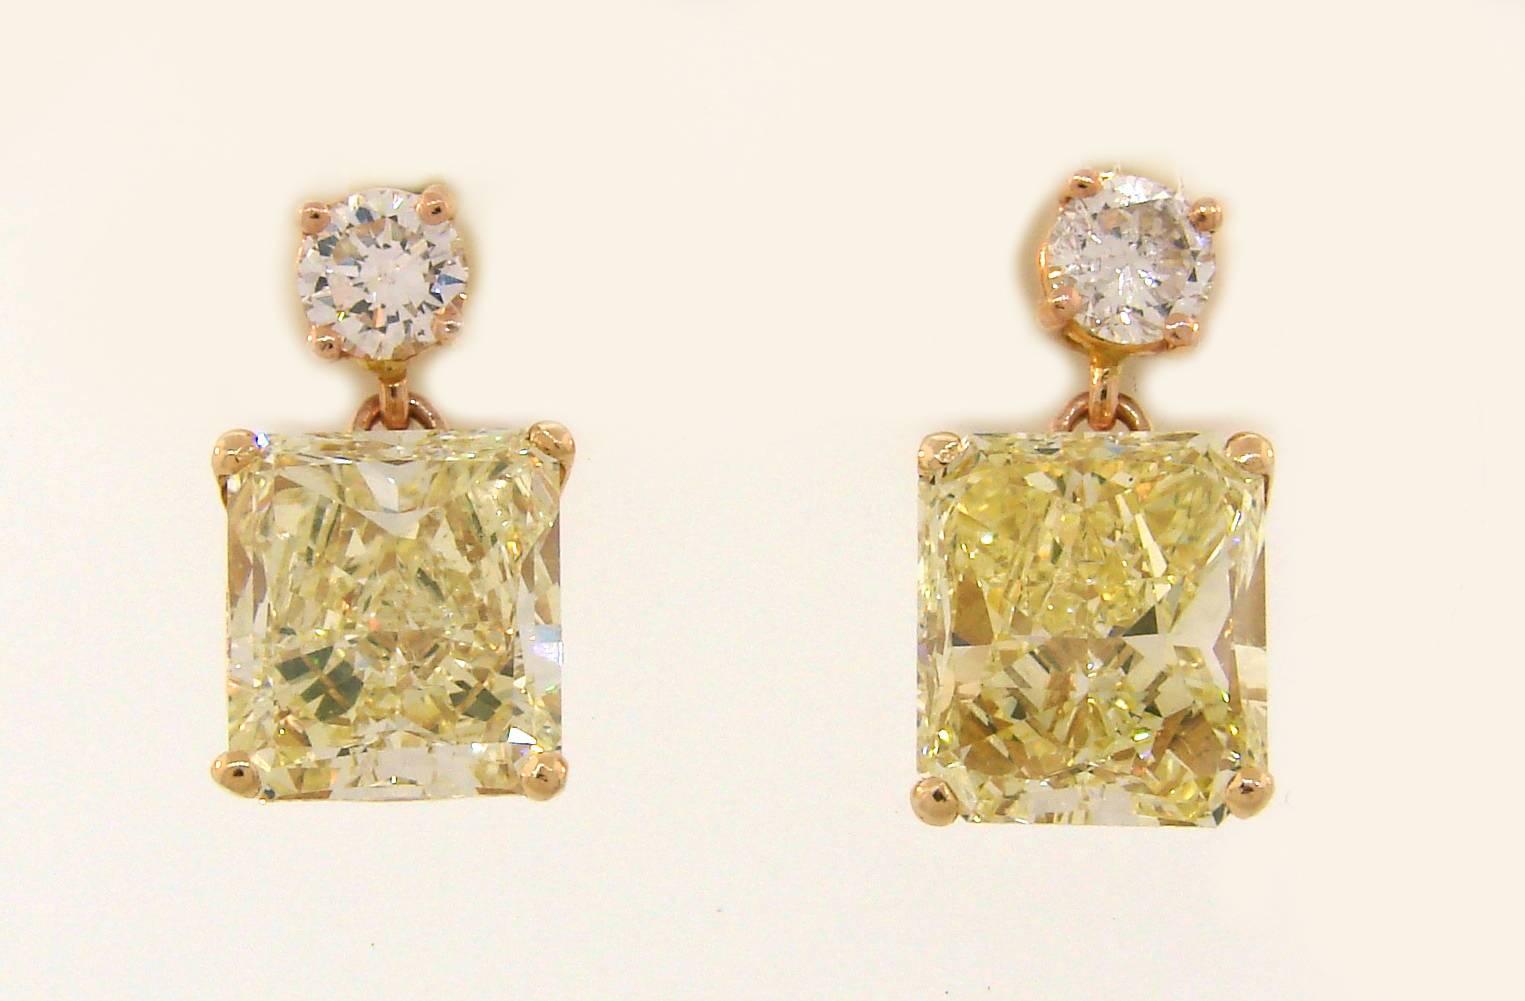 Classic and timeless two-stone earrings that are a great addition to your jewelry collection. They are made of 18 karat (tested) rose gold and feature two rectangular modified brilliant cut fancy yellow diamonds. Each diamond comes with a GIA